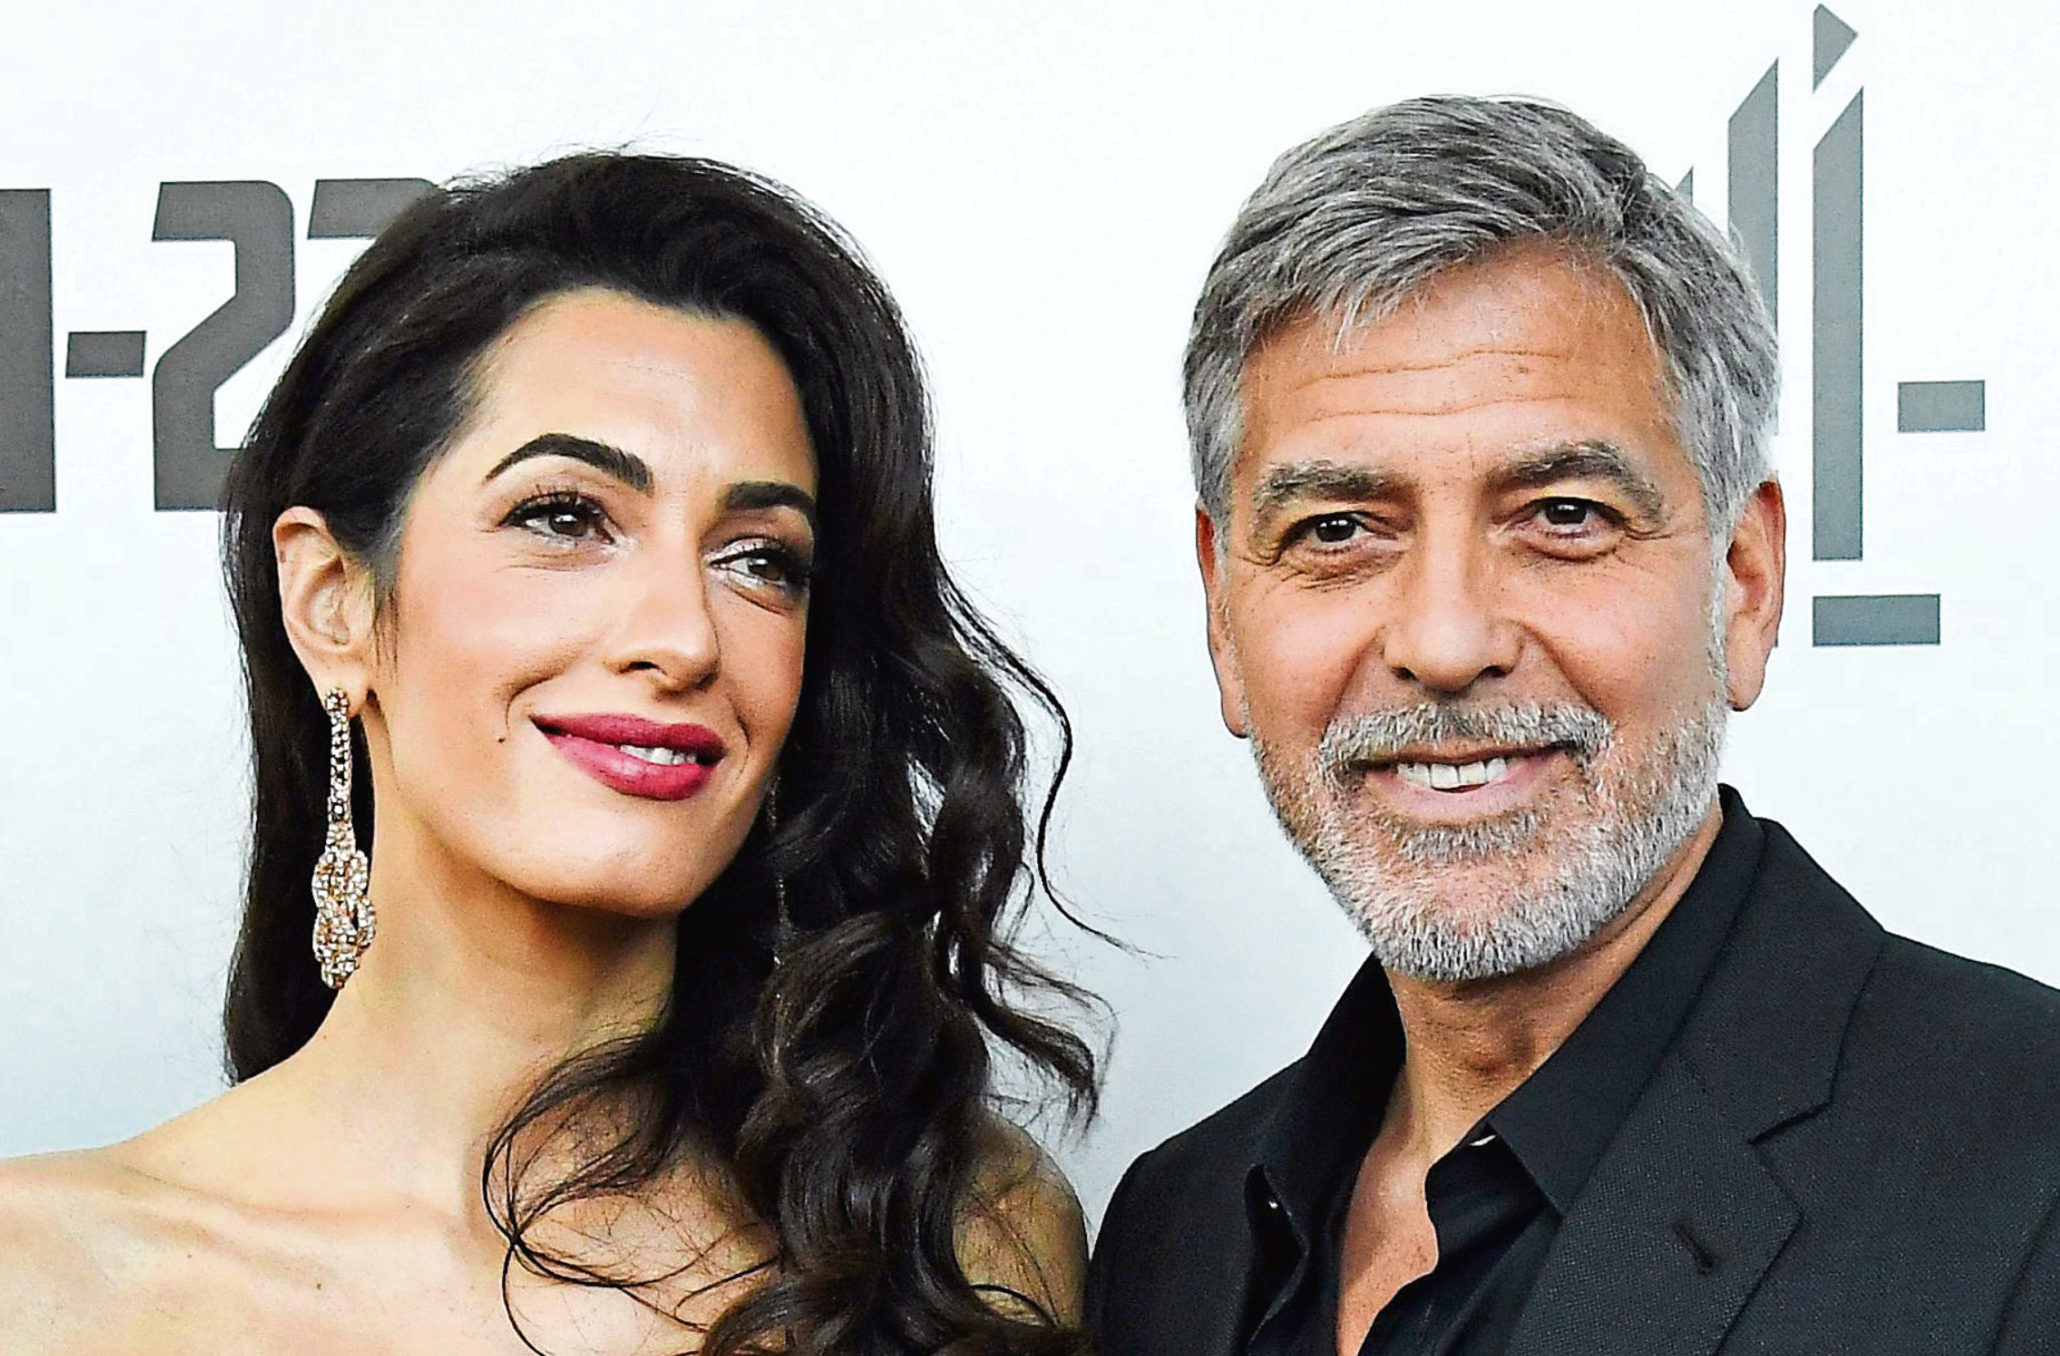 Family life with Amal and their twins means everything, says George Clooney